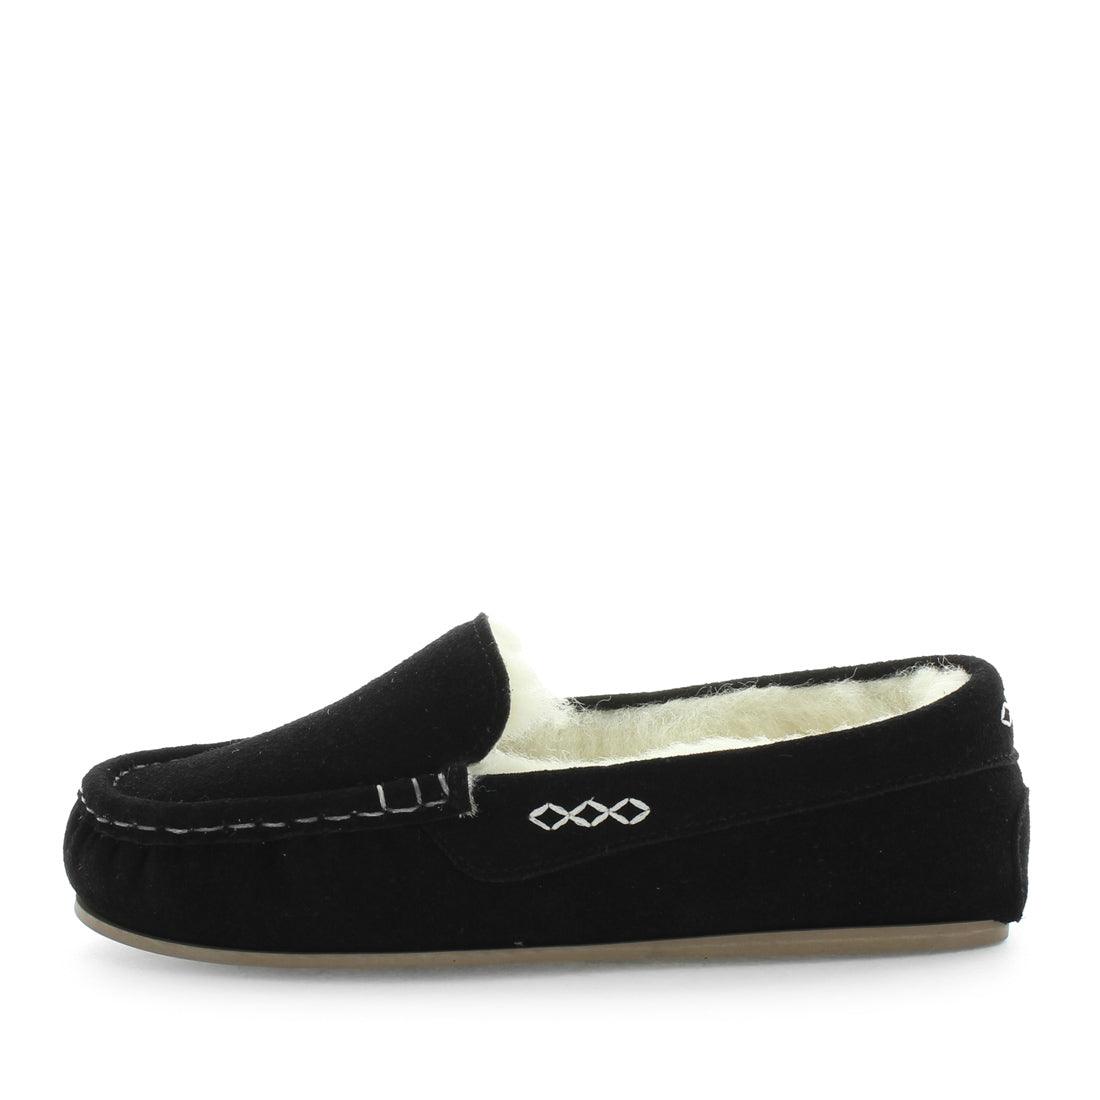 CRISPY by JUST BEE - iShoes - NEW ARRIVALS, What's New, What's New: Women's New Arrivals, Women's Shoes: Slippers - FOOTWEAR-FOOTWEAR